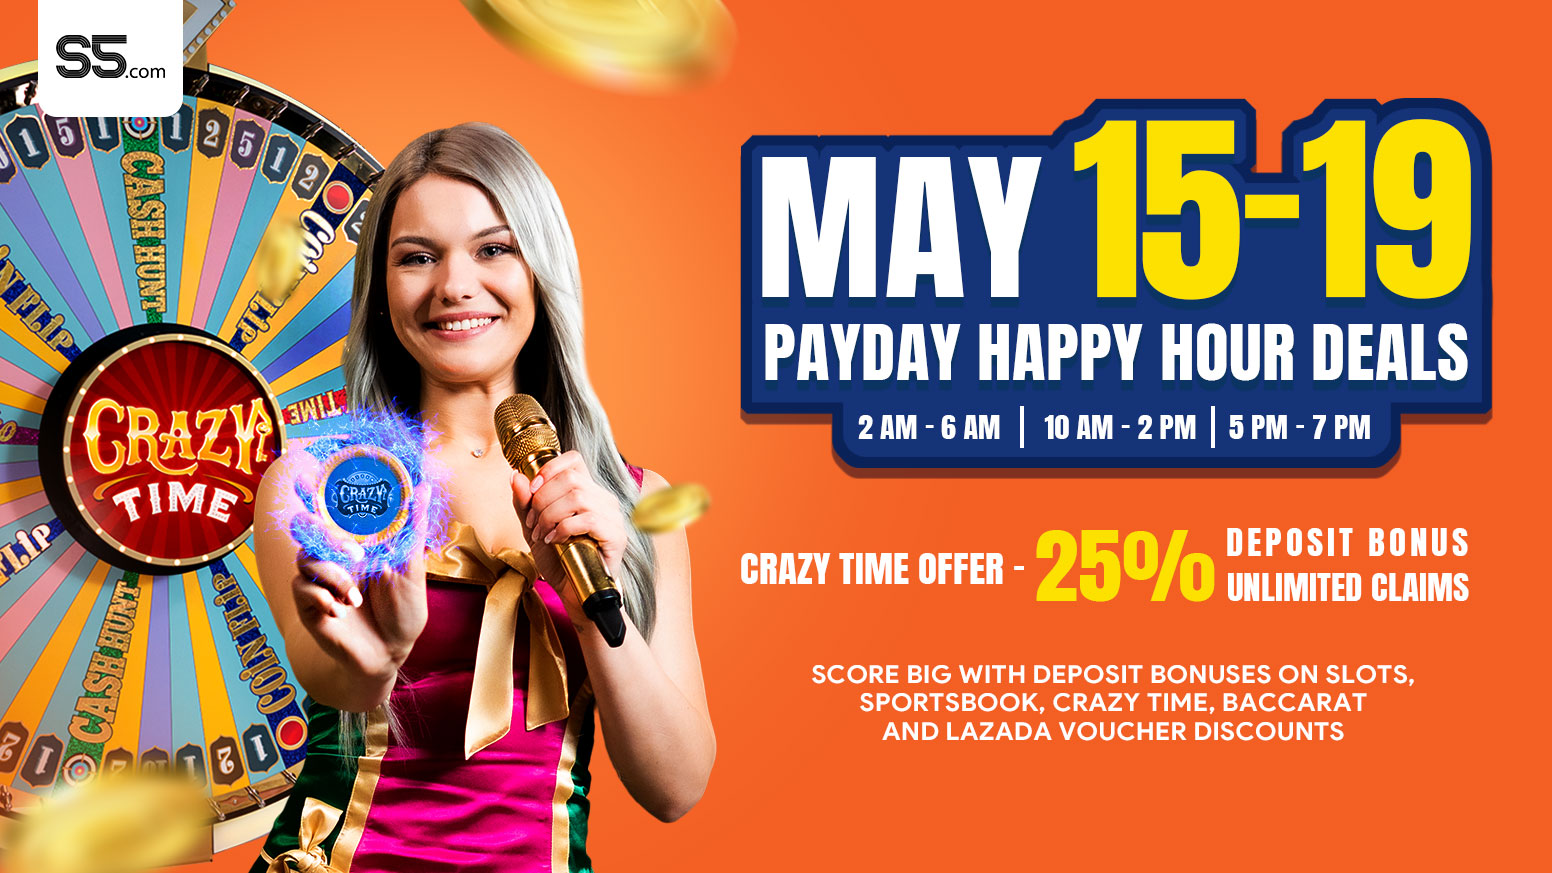 Crazy Time Special: Payday Happy Hour at S5.com 